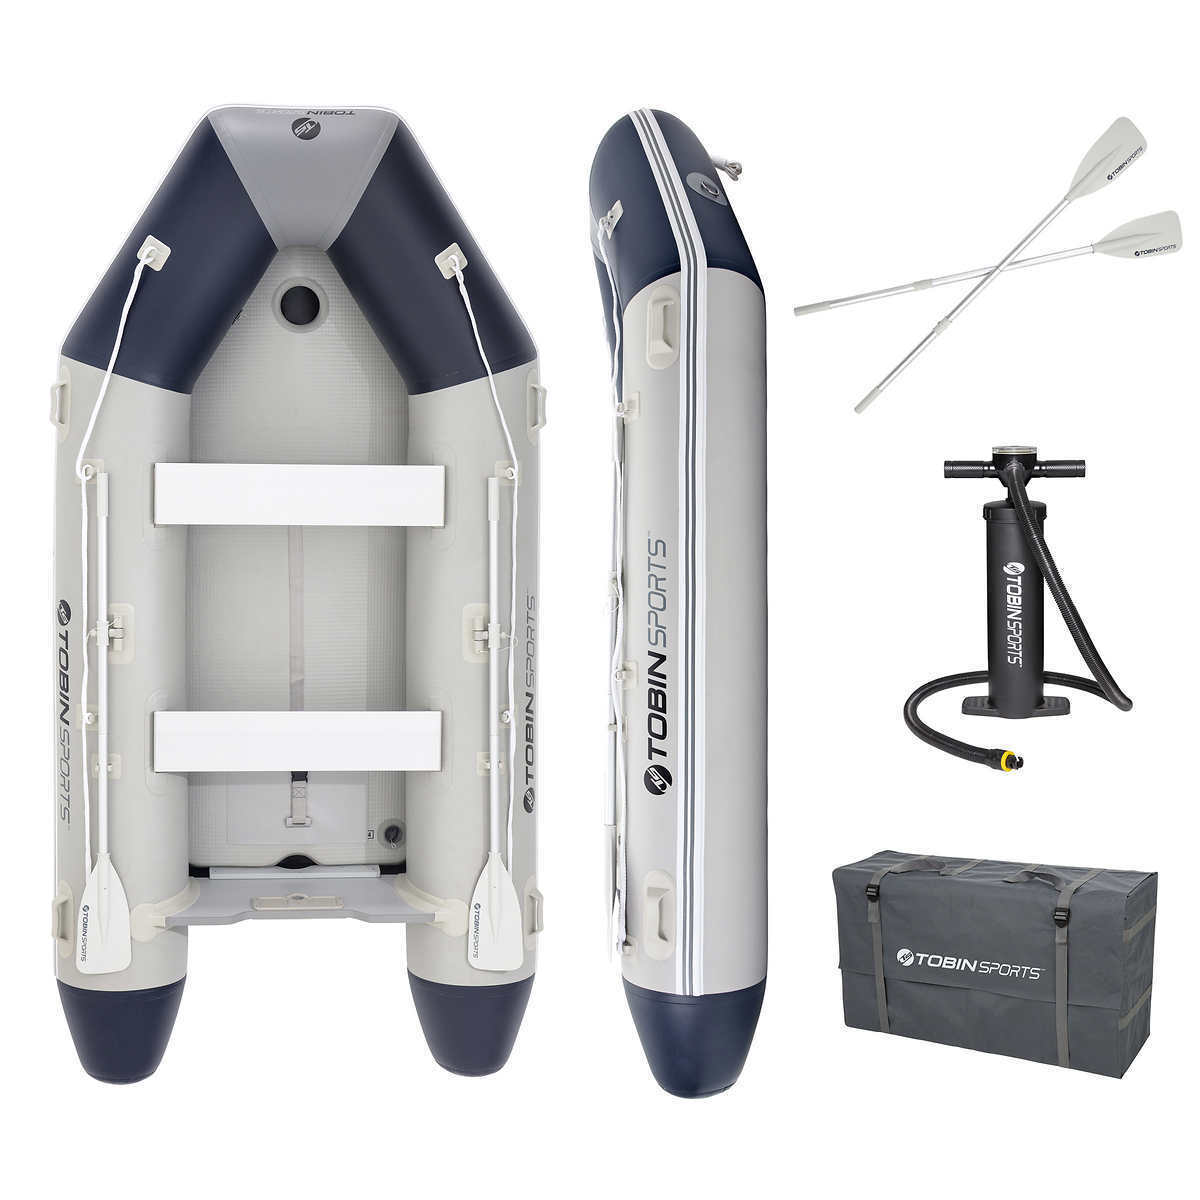 Tobin Sports Inflatable Boat: A Comprehensive Review